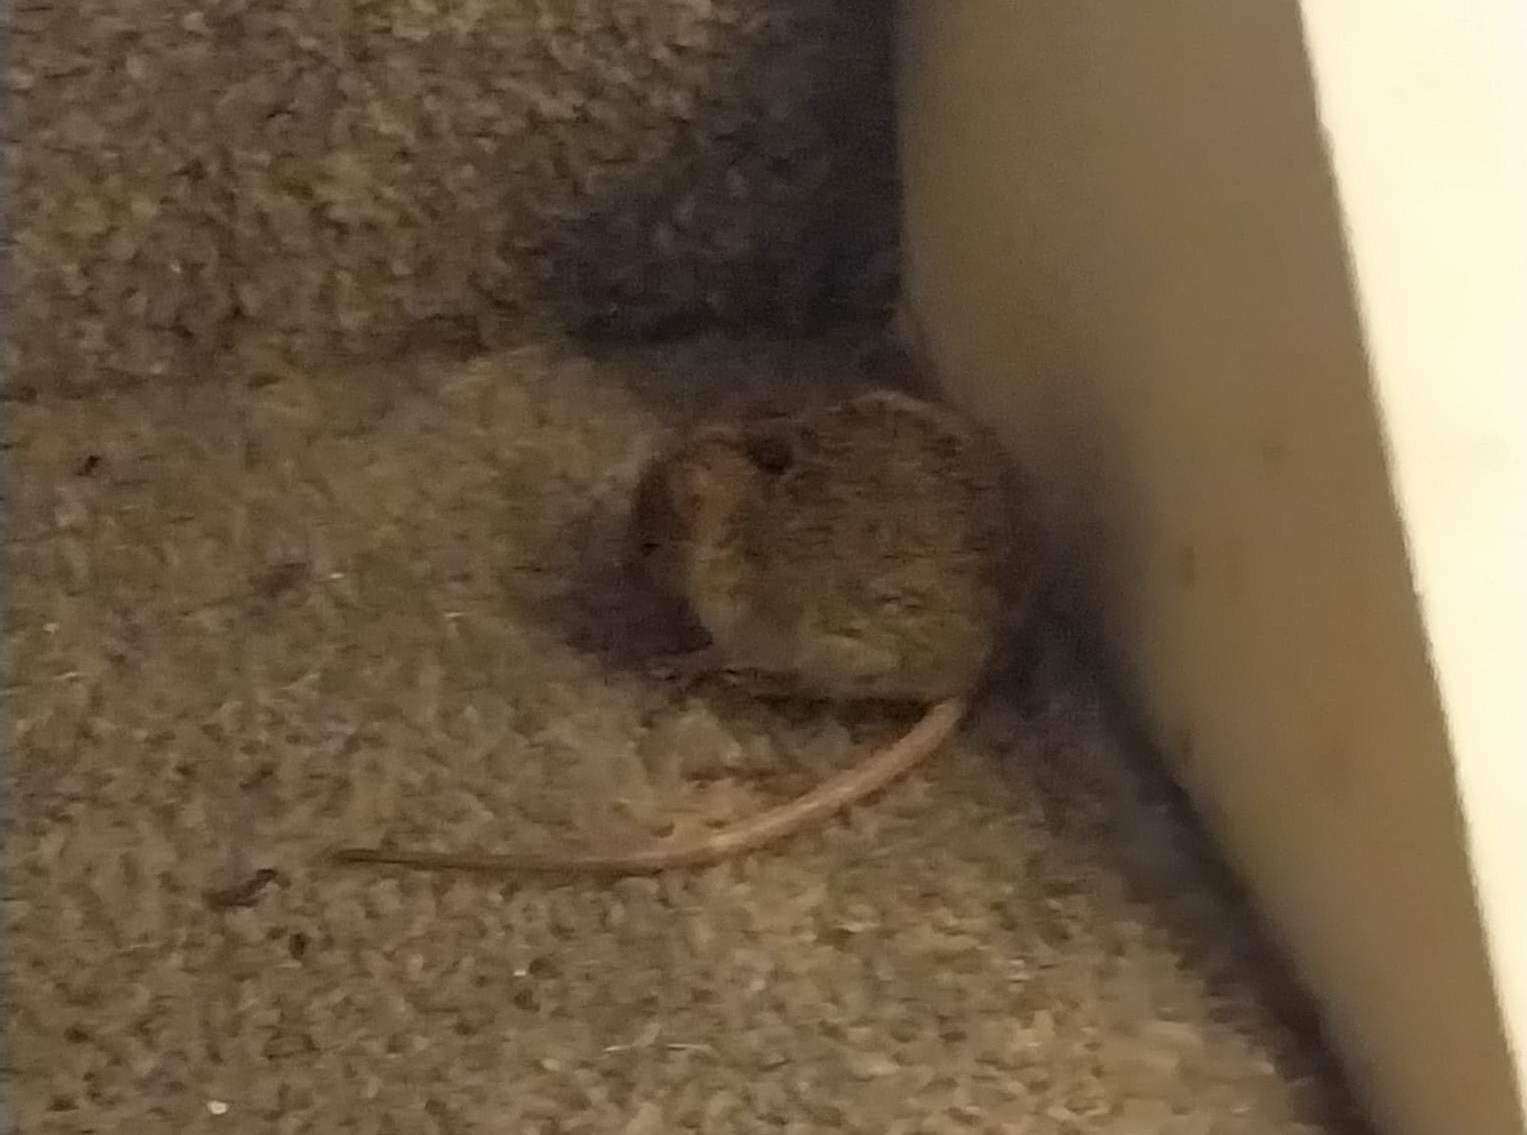 A mouse in Vicky's home